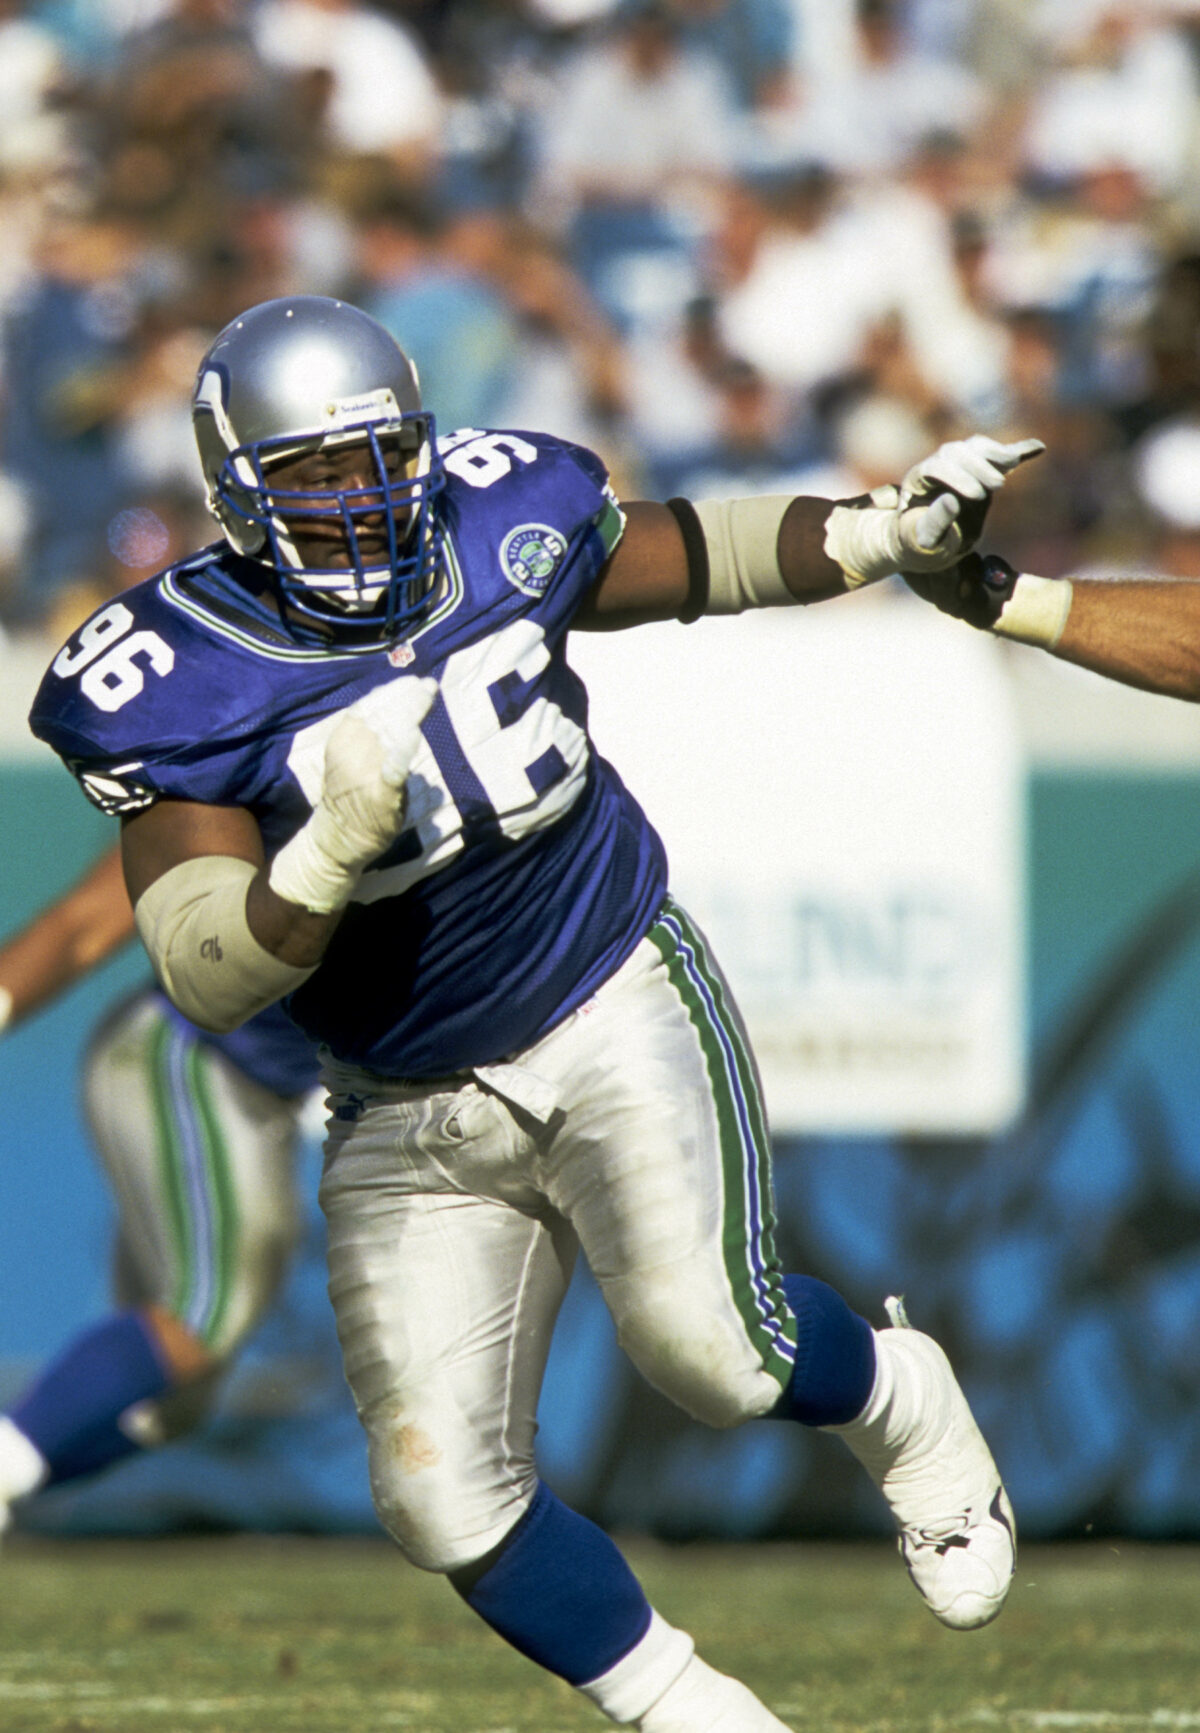 Poll – Should the Seahawks switch to their throwbacks full time?